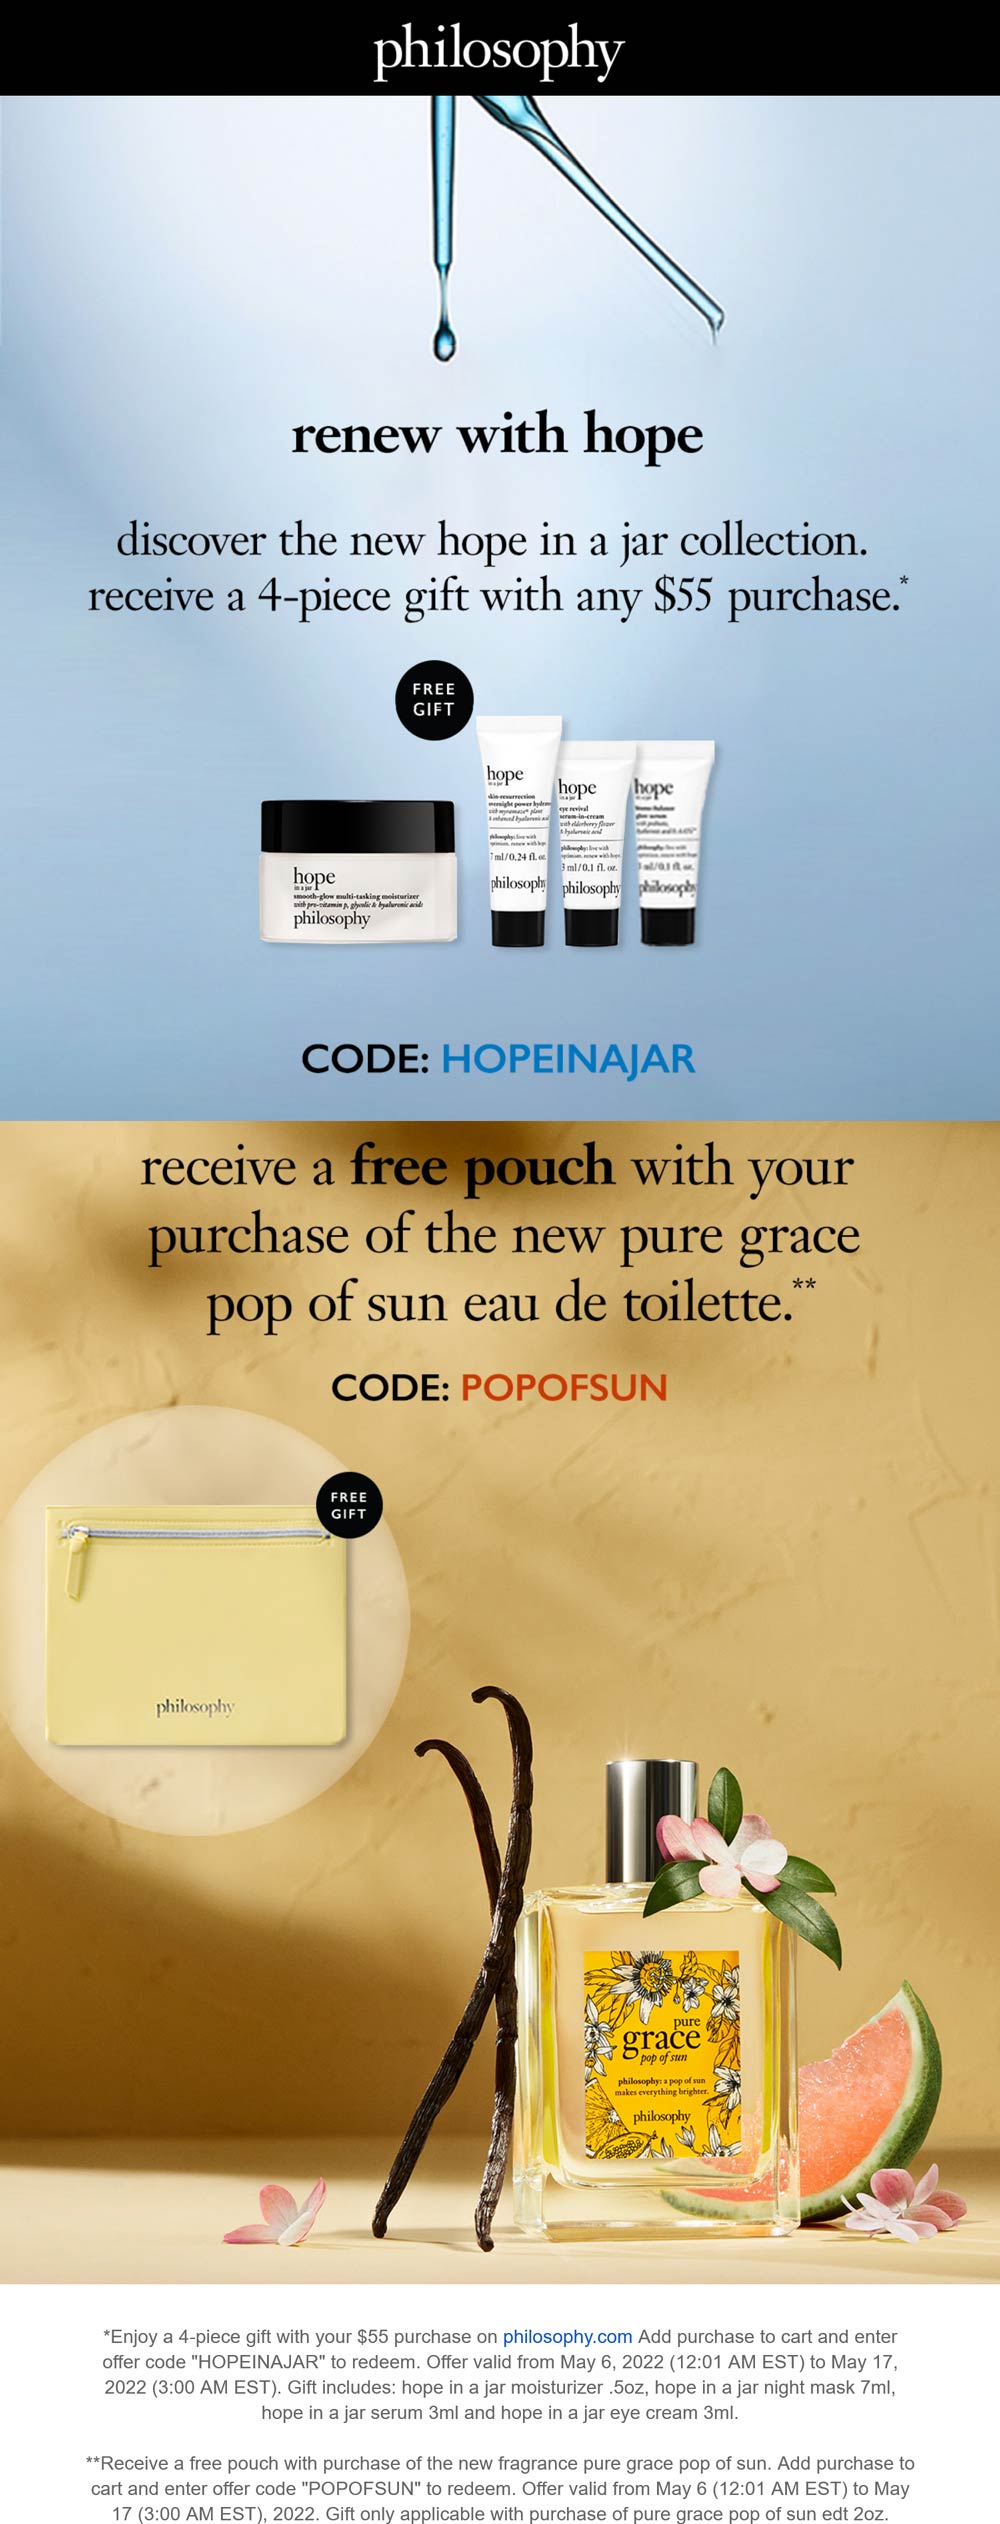 Philosophy stores Coupon  Free 4pc set on $55 & more at Philosophy via promo code HOPEINAJAR or POPOFSUN #philosophy 